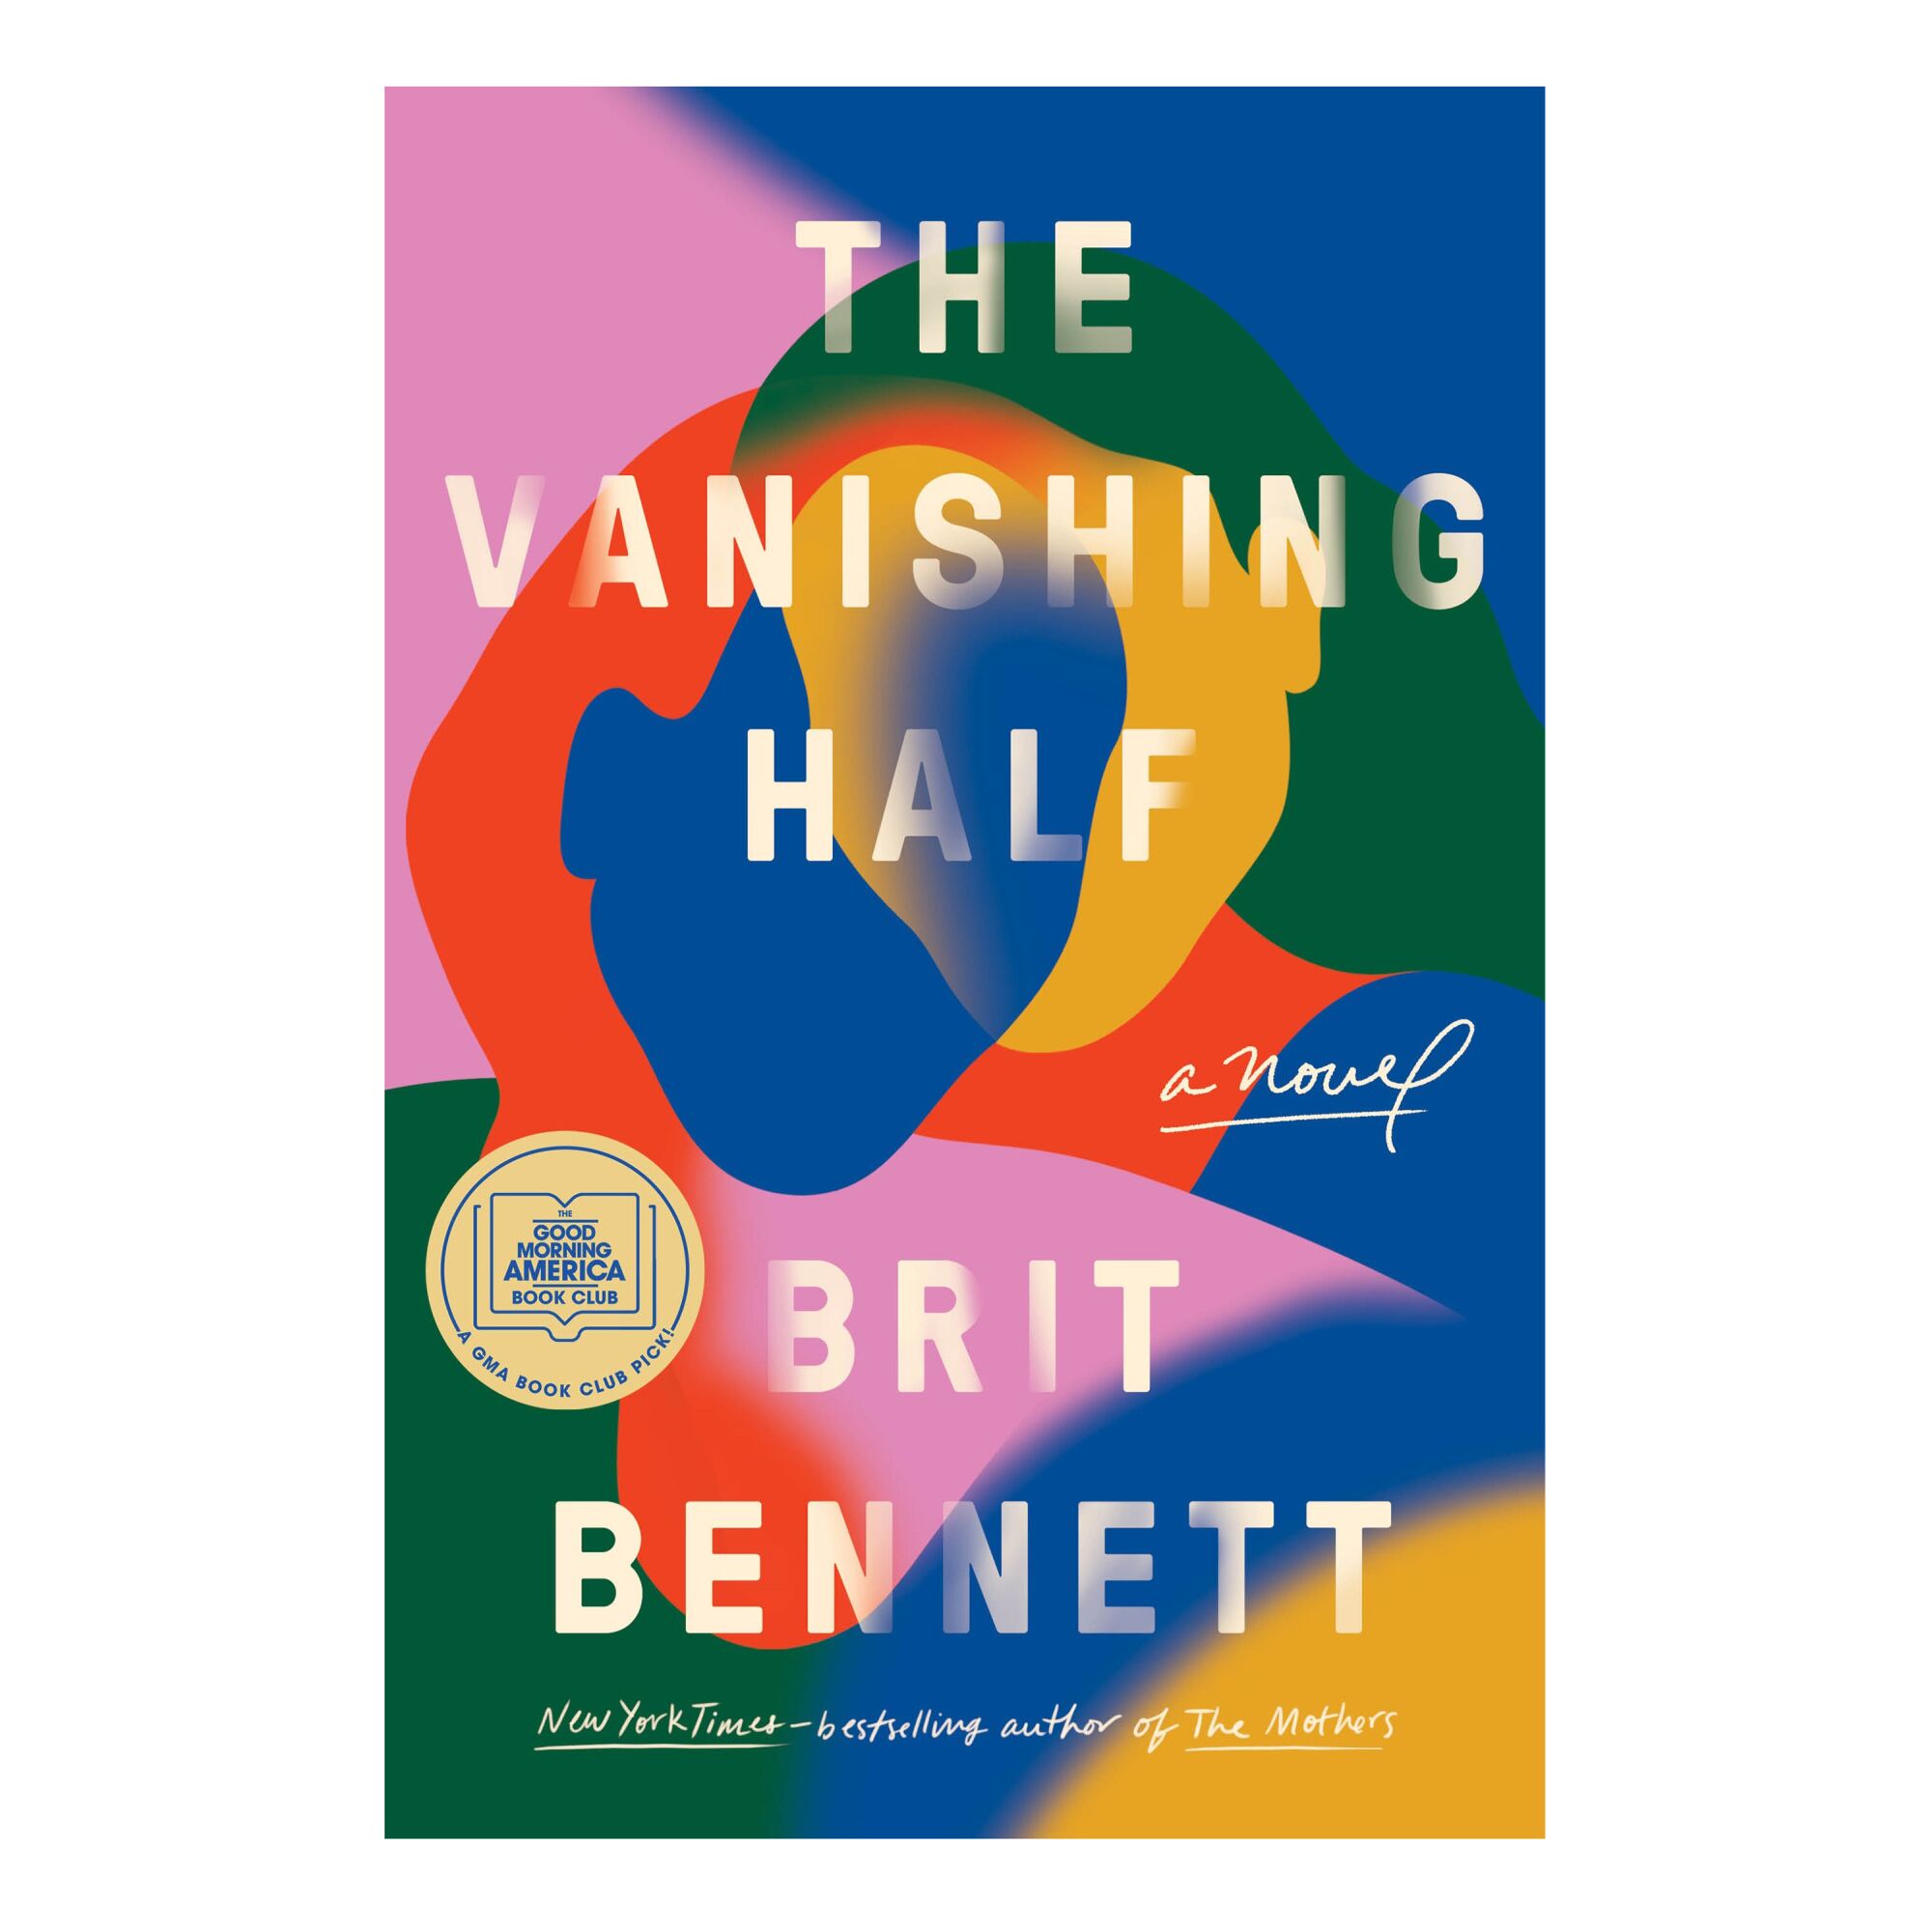 HOLIDAY GIFT GUIDE - Cover of the book The Vanishing Half by Brit Bennett.